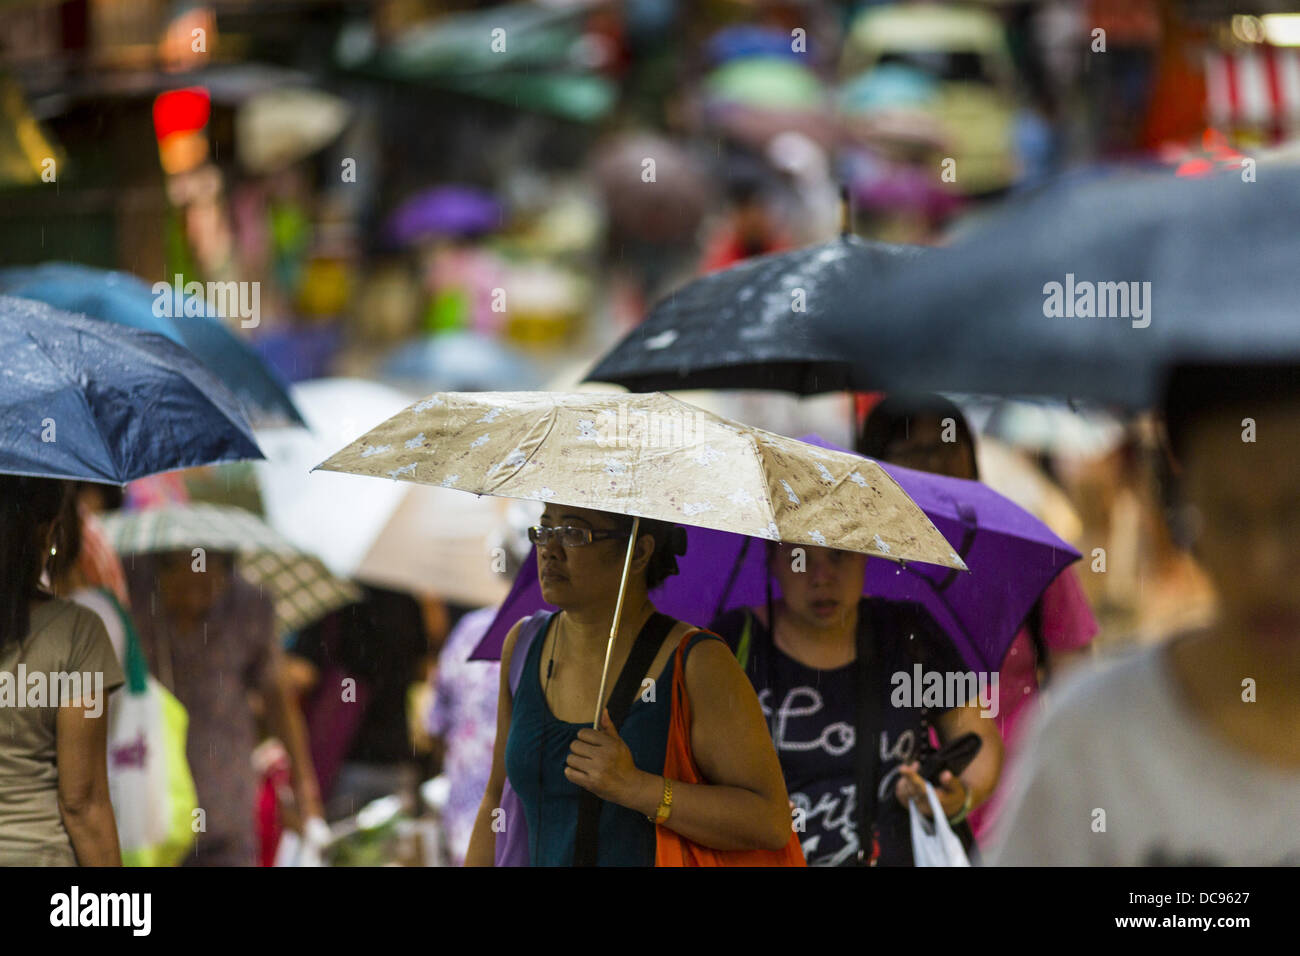 Hong Kong. 13th August 2013.  People shopping on Gage Street in Hong Kong use umbrellas to protect themselves from the rains of Typhoon Utor. Typhoon Utor (known in the Philippines as Typhoon Labuyo) is an active tropical cyclone located over the South China Sea. The eleventh named storm and second typhoon of the 2013 typhoon season, Utor formed from a tropical depression on August 8. The depression was upgraded to Tropical Storm Utor the following day, and to typhoon intensity just a few hours afterwards. Credit:  ZUMA Press, Inc./Alamy Live News Stock Photo